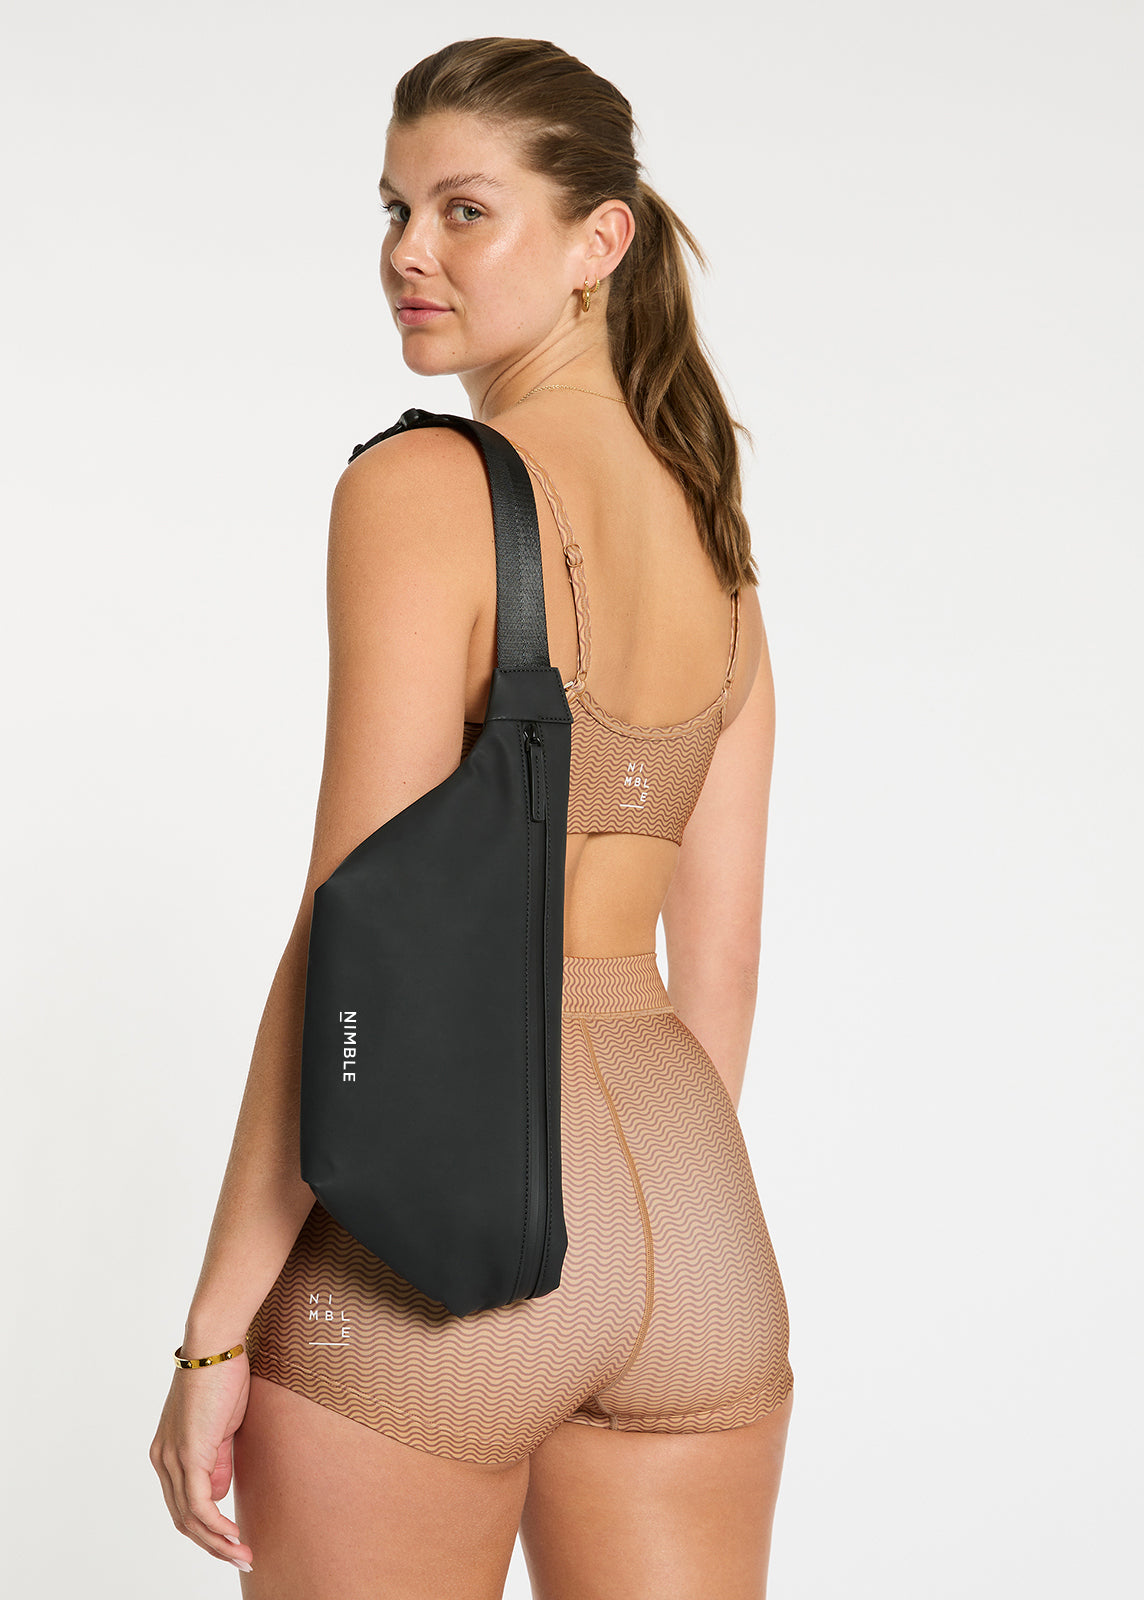 Close Up Of Model Stood Facing Backwards Wearing A Black Splash Proof Cross Body Bag With Contrasting White Nimble Logo To The Centre Bottom Over Their Shoulder.